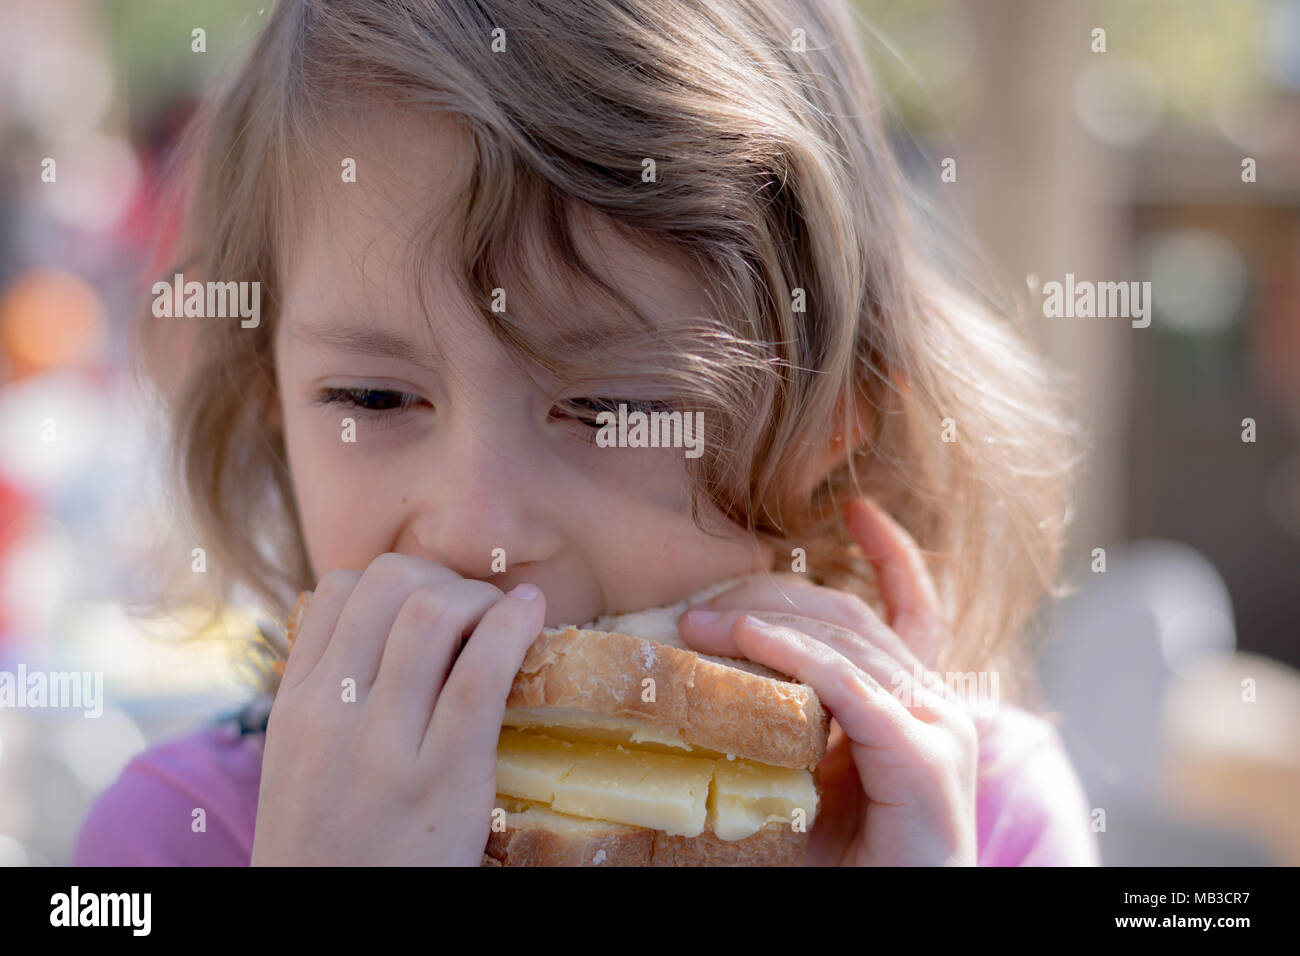 Young girl taking a bite out of a large cheese sandwich Stock Photo